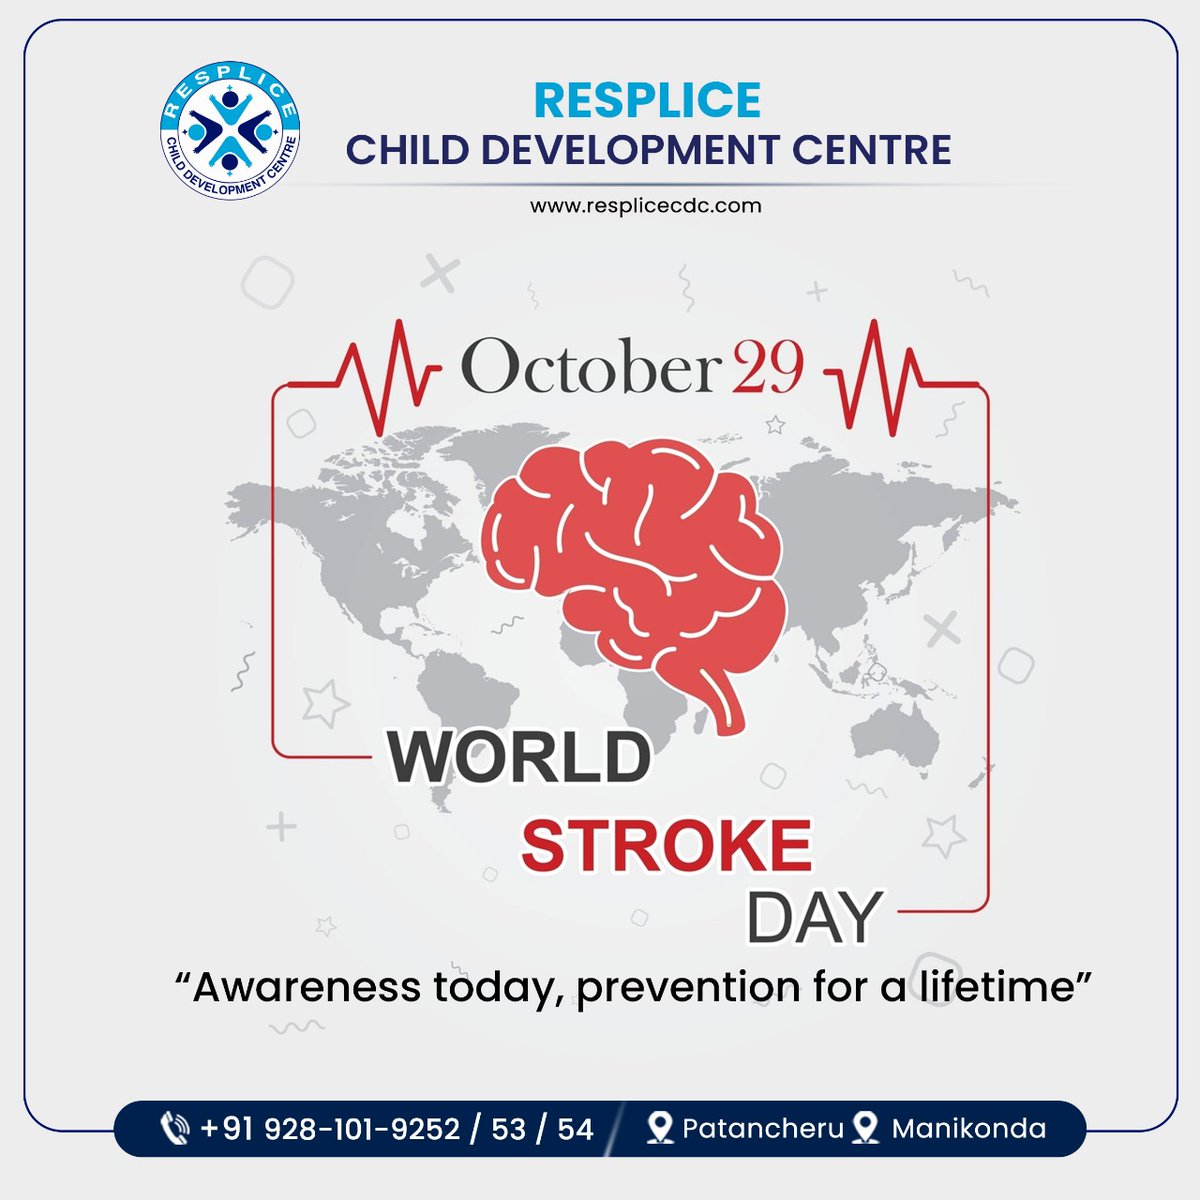 Raising awareness on World Stroke Day at Resplice Child Development Centre. Knowledge is power, and understanding stroke prevention and recovery is crucial. Together, we can make a difference
#WorldStrokeDay #worldstrokeday #worldstroke #stroke #strokeawareness #strokeprevention